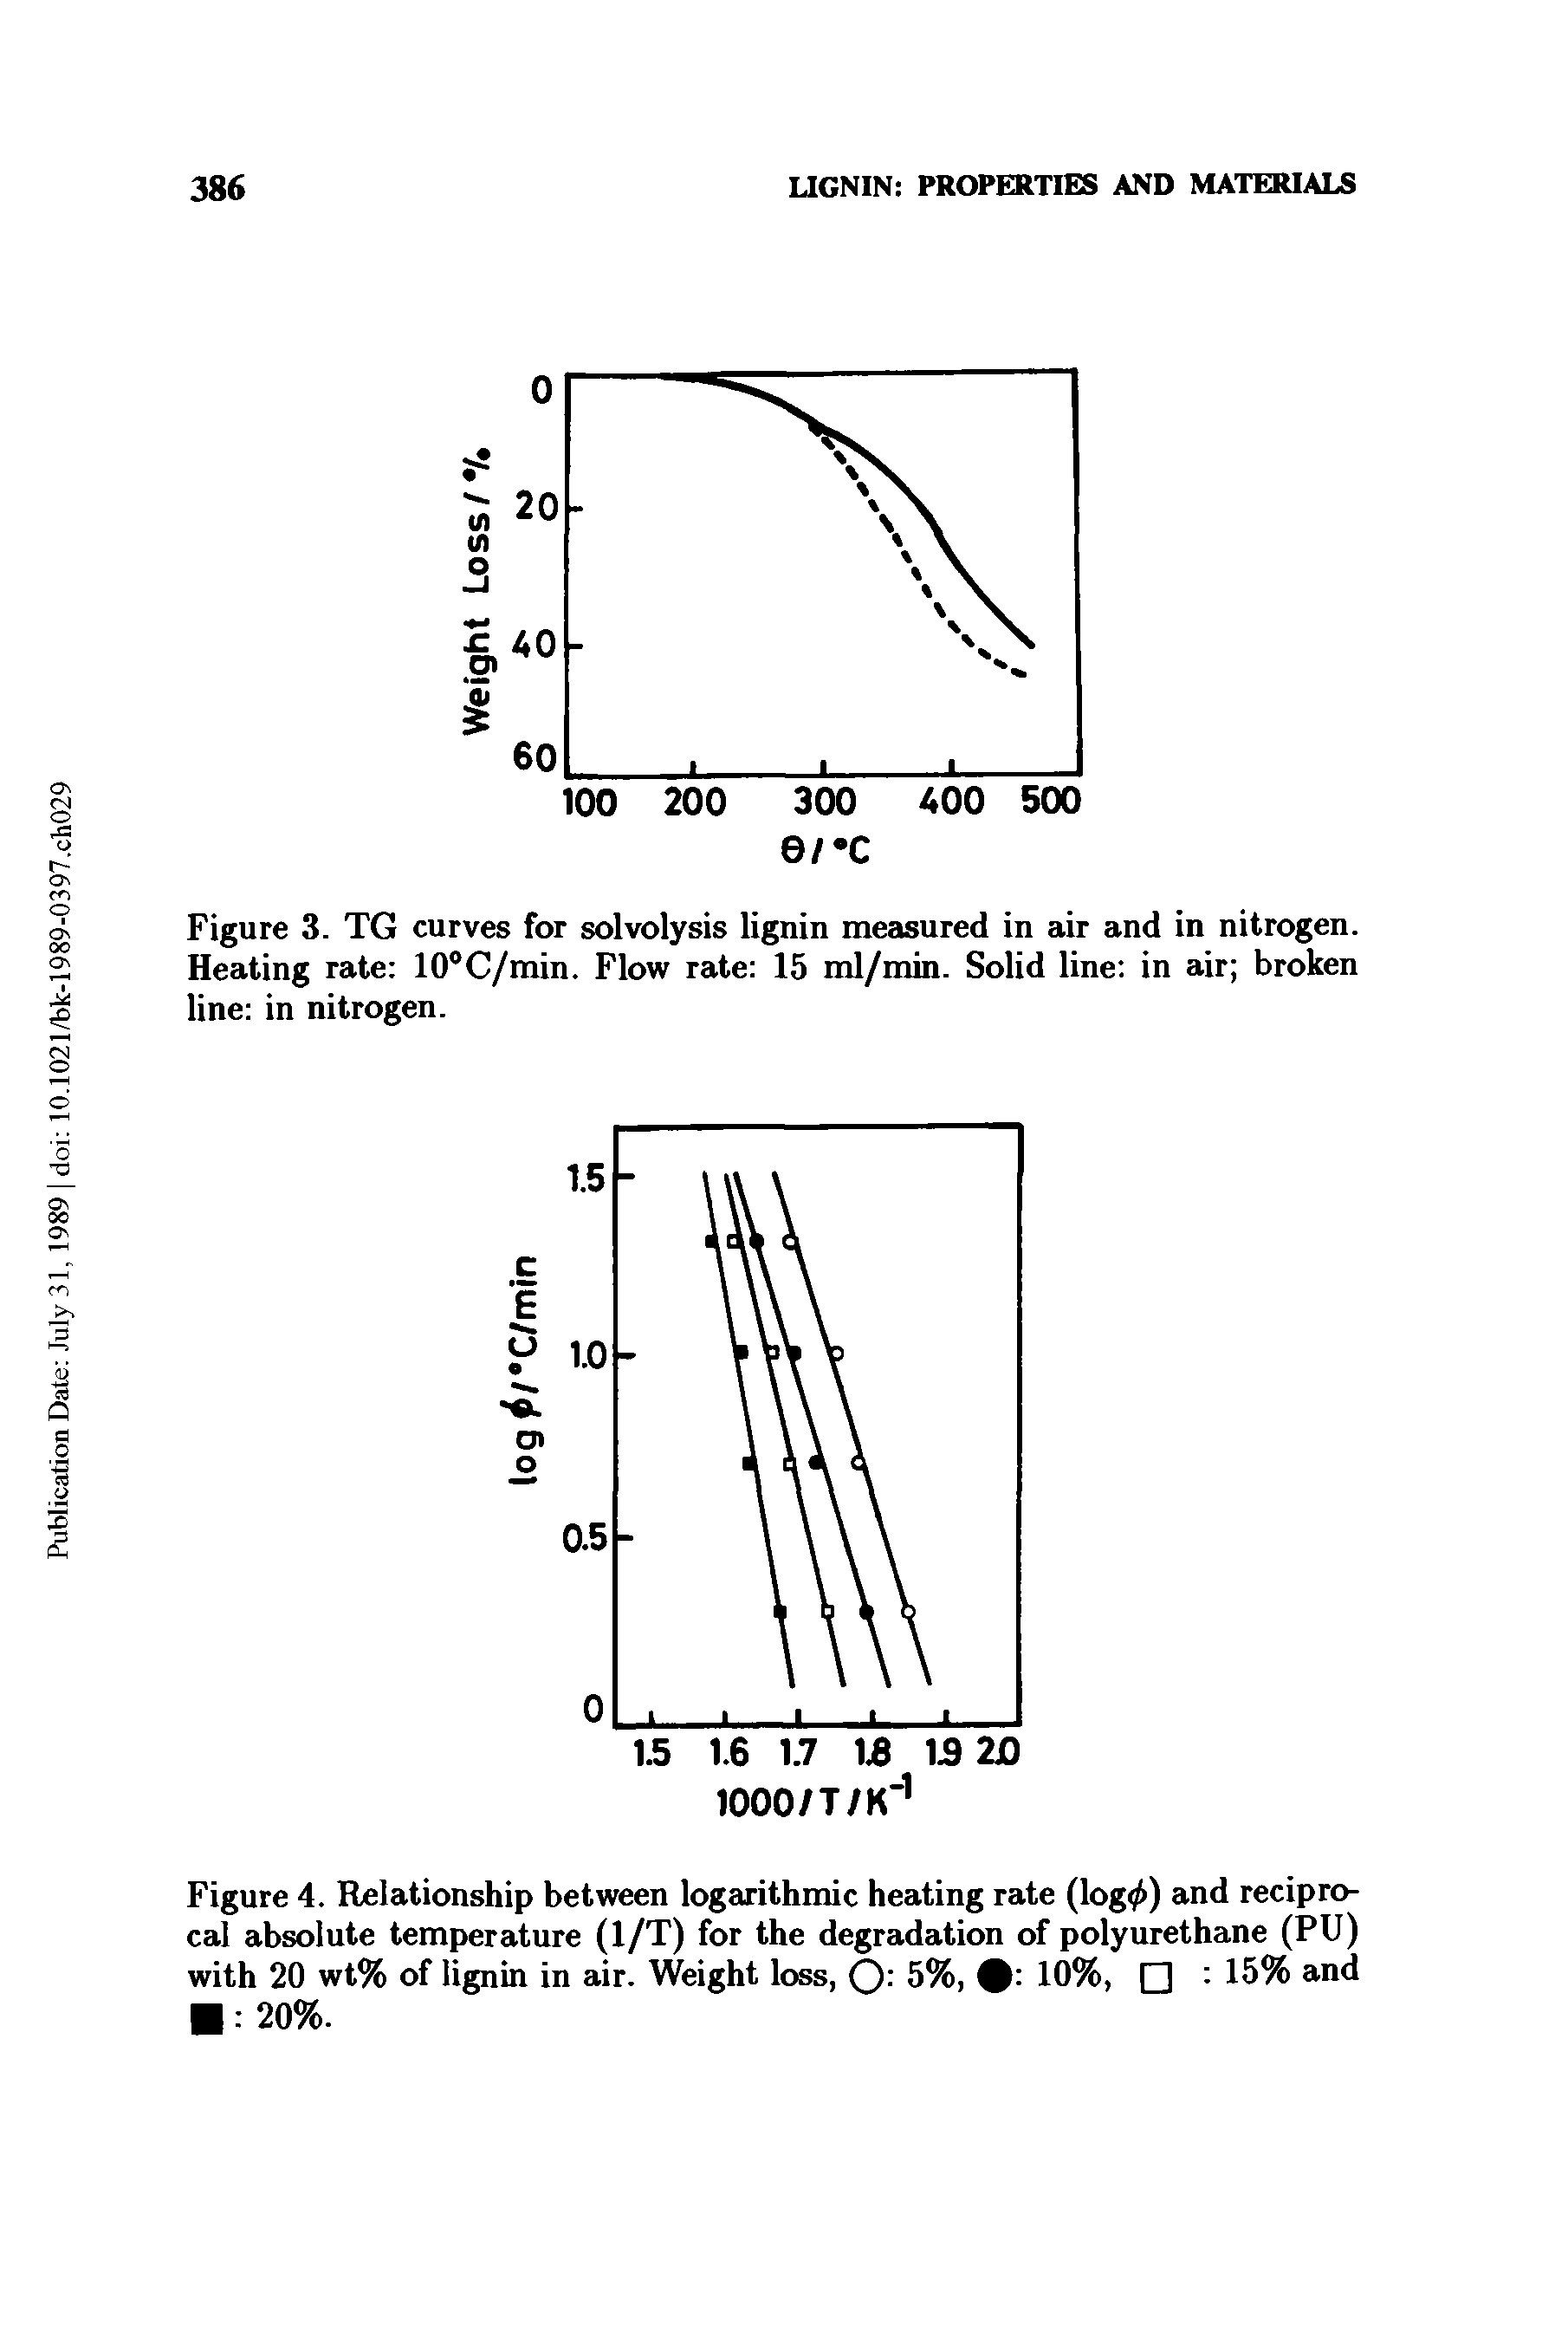 Figure 3. TG curves for solvolysis lignin measured in air and in nitrogen. Heating rate 10°C/min. Flow rate 15 ml/min. Solid line in air broken line in nitrogen.